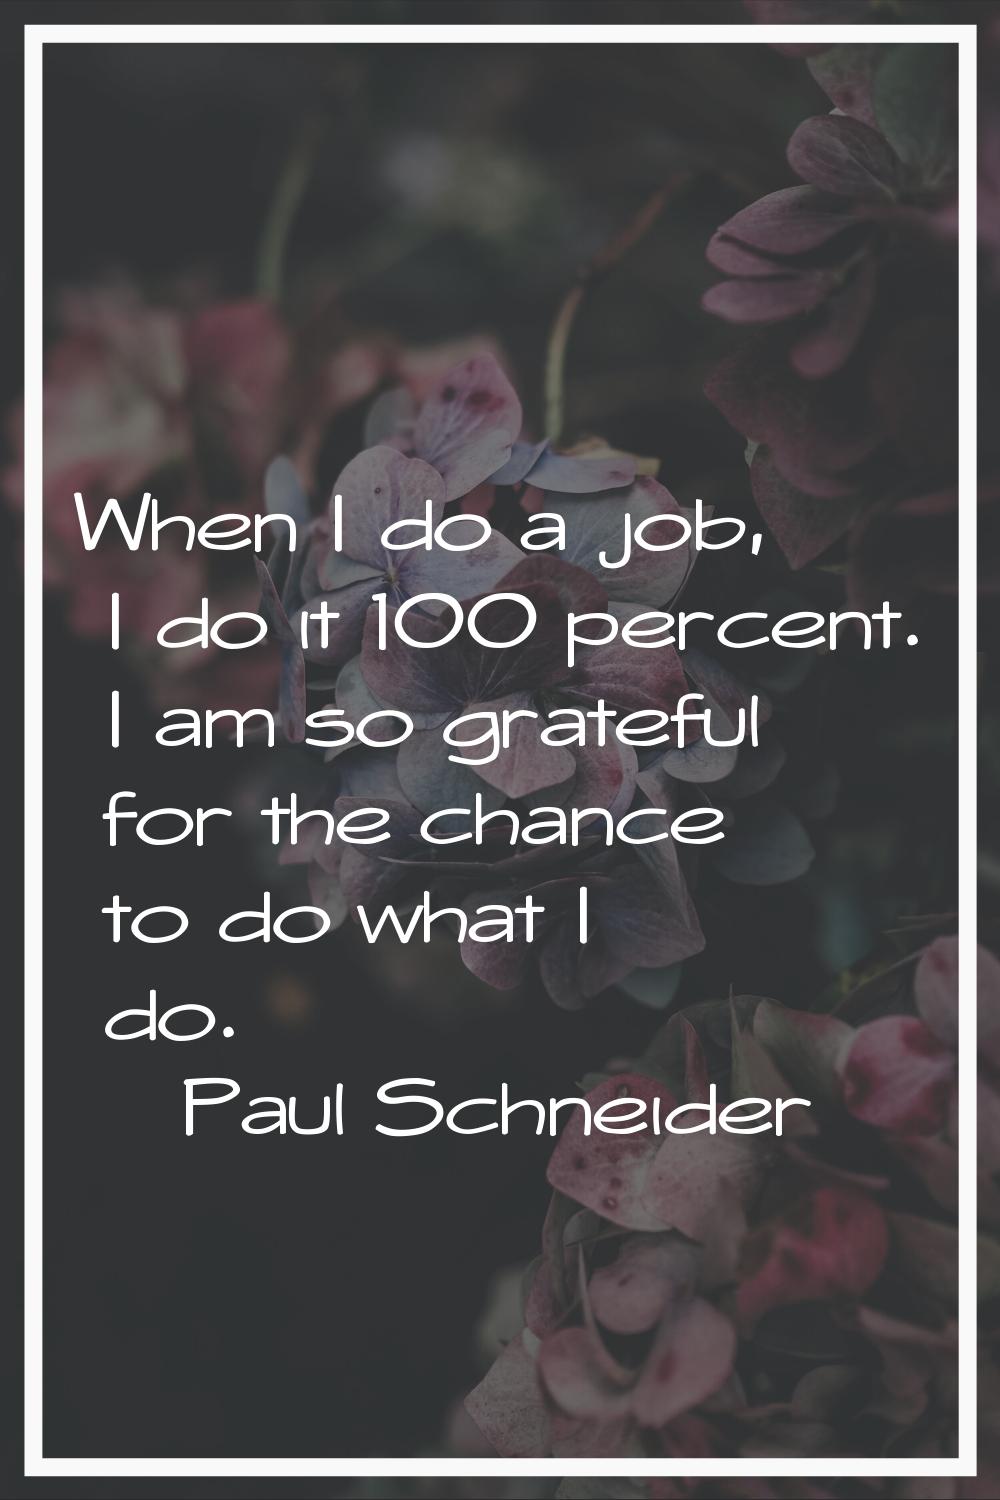 When I do a job, I do it 100 percent. I am so grateful for the chance to do what I do.